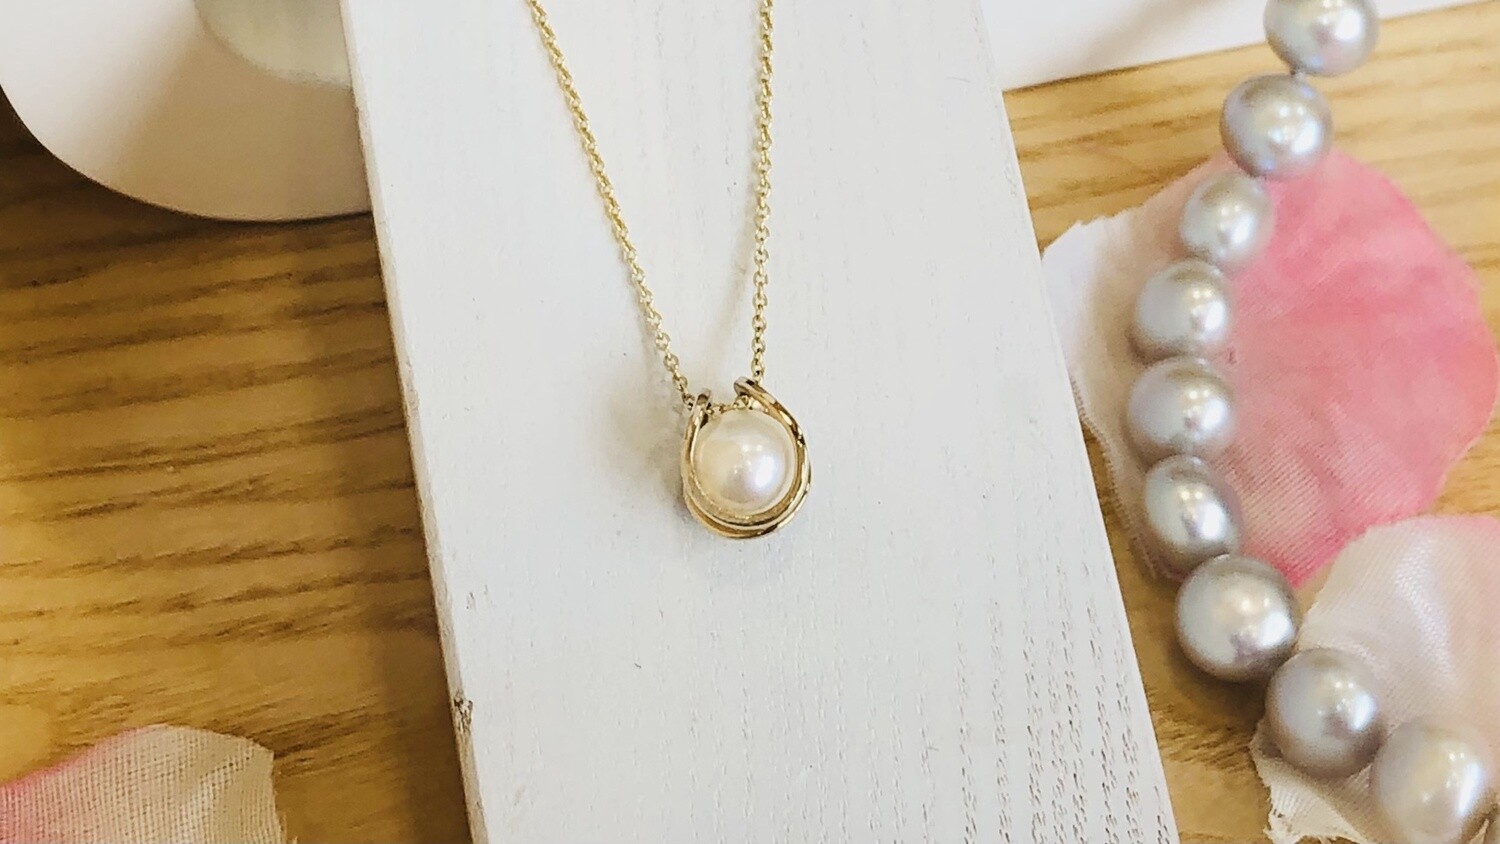 Sling-shot orbit pendant with pearl in gold